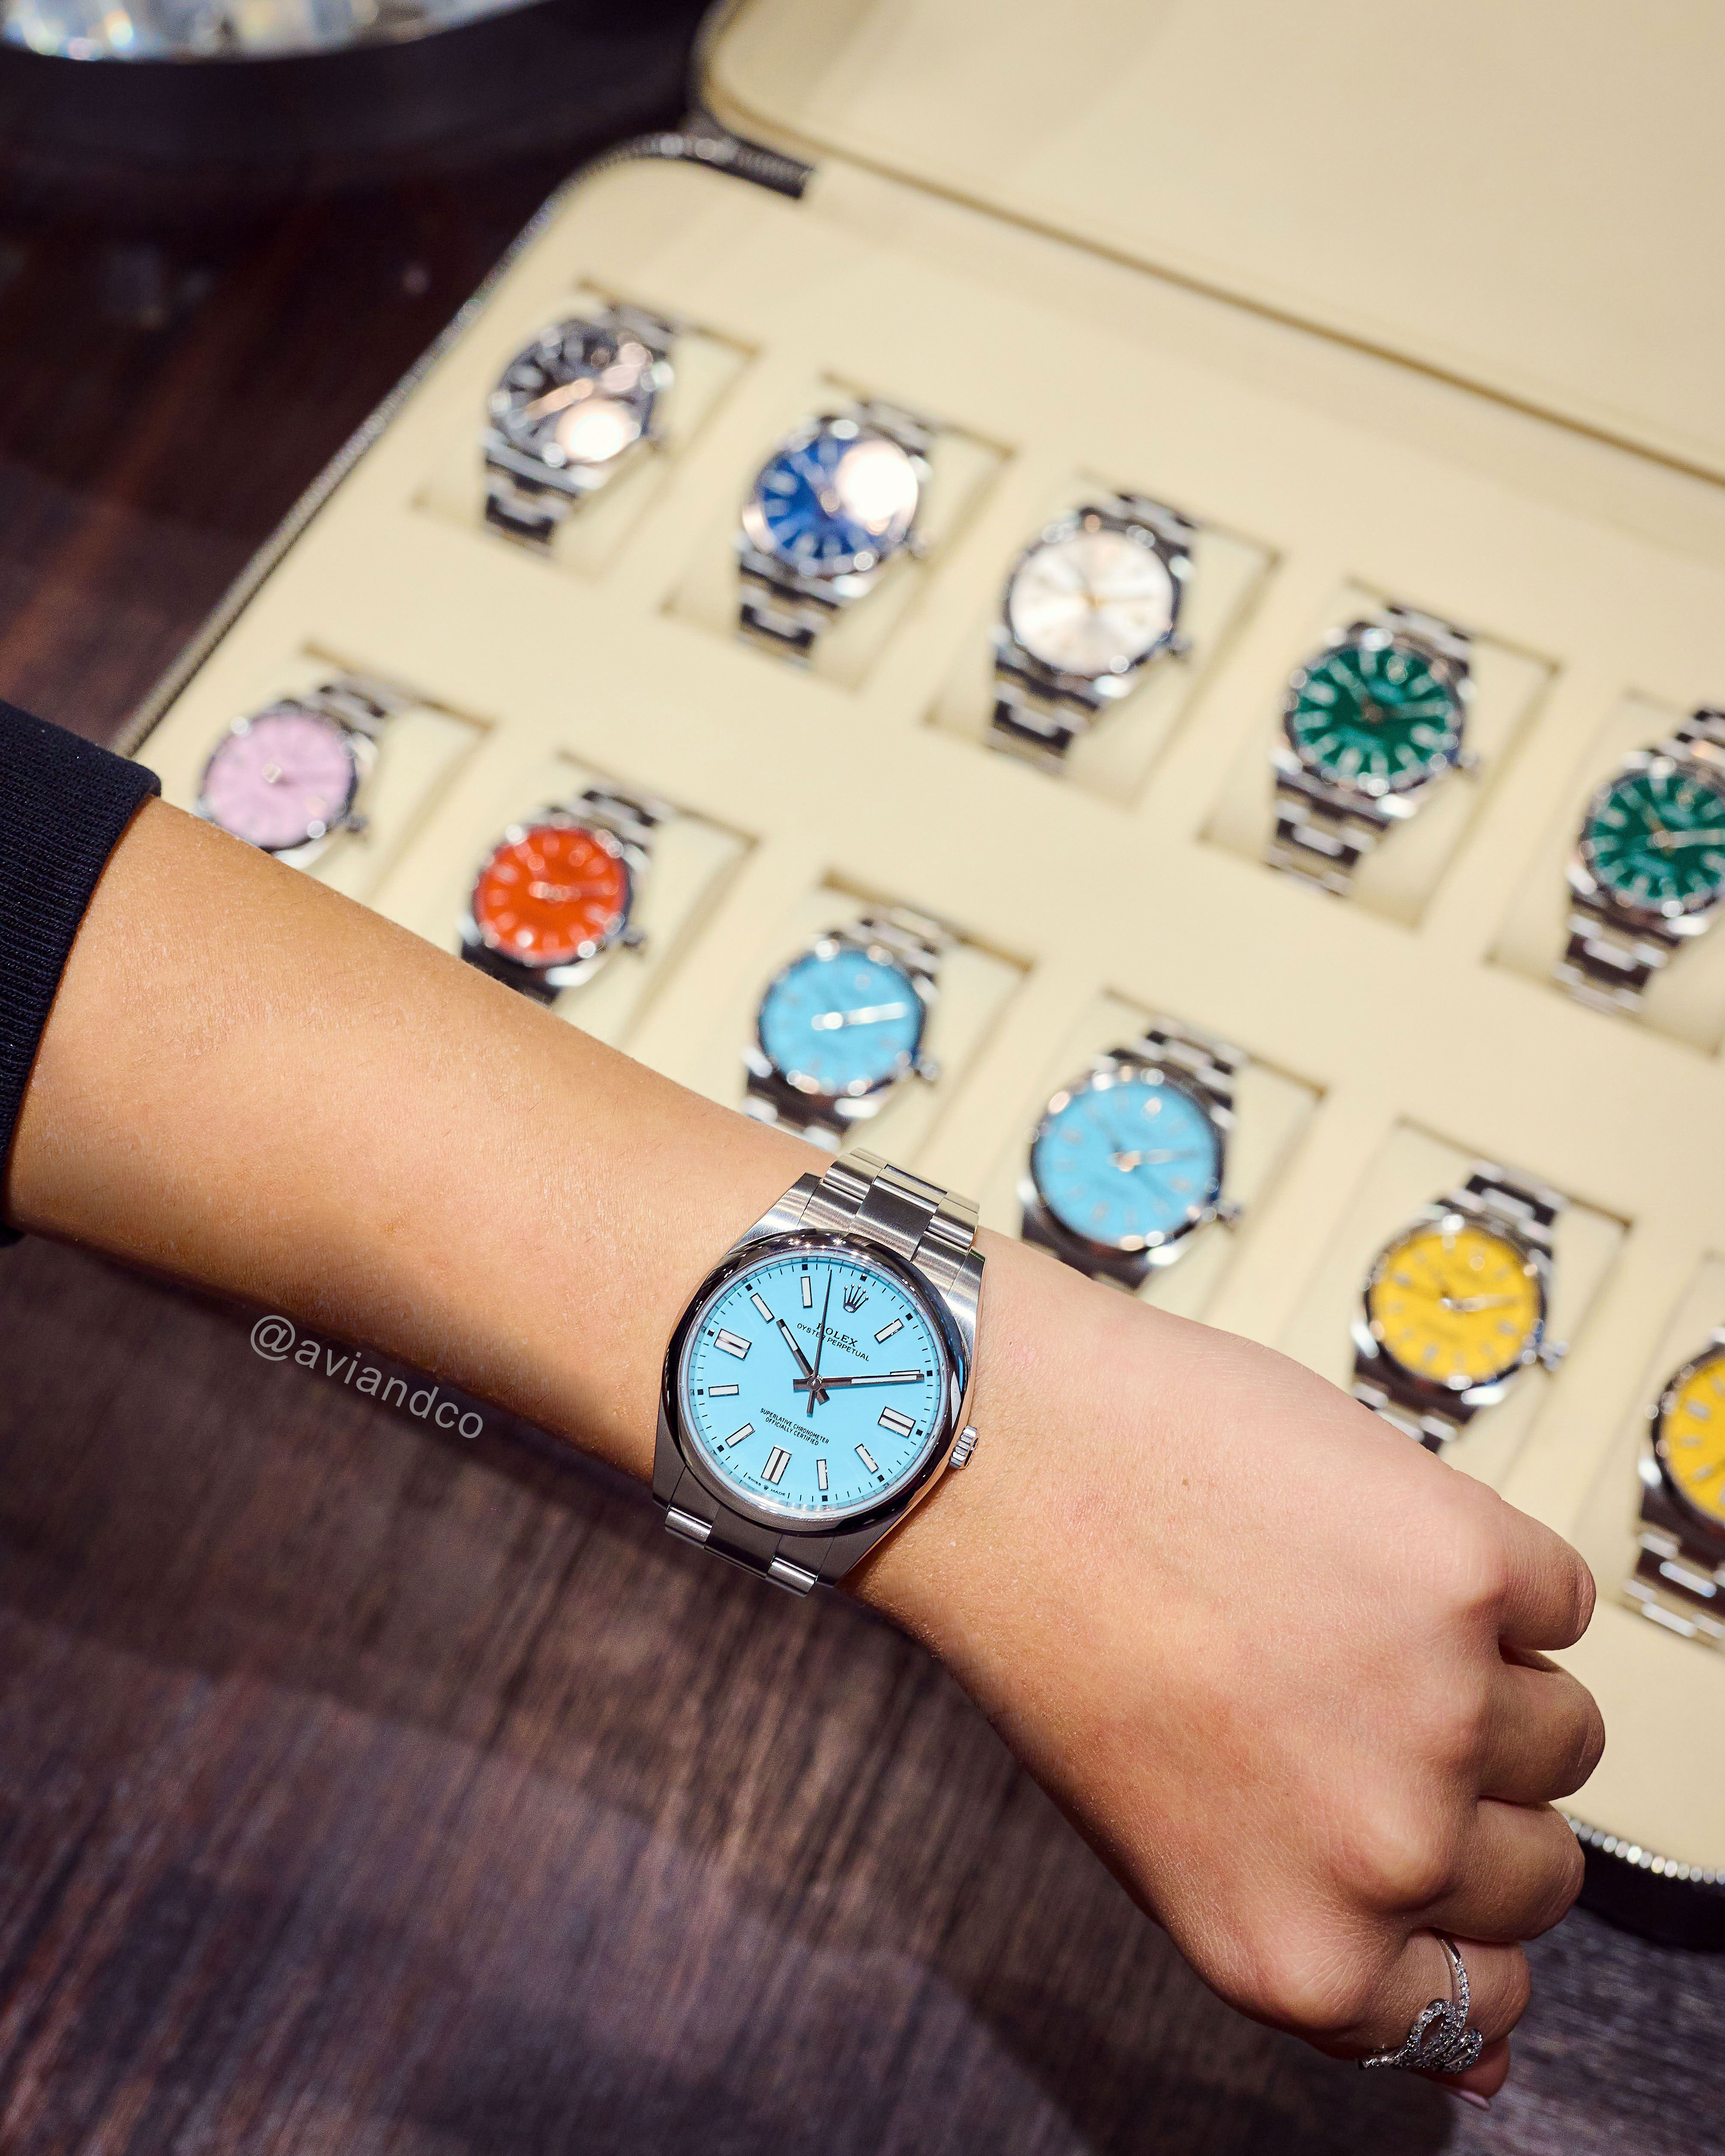 Stainless Steel, Turquoise Index Dial Timepiece on a Woman’s Wrist Above a Watch Case of 12 Colorful Dial Oyster Perpetuals Which are Popular Watch Trends in 2023